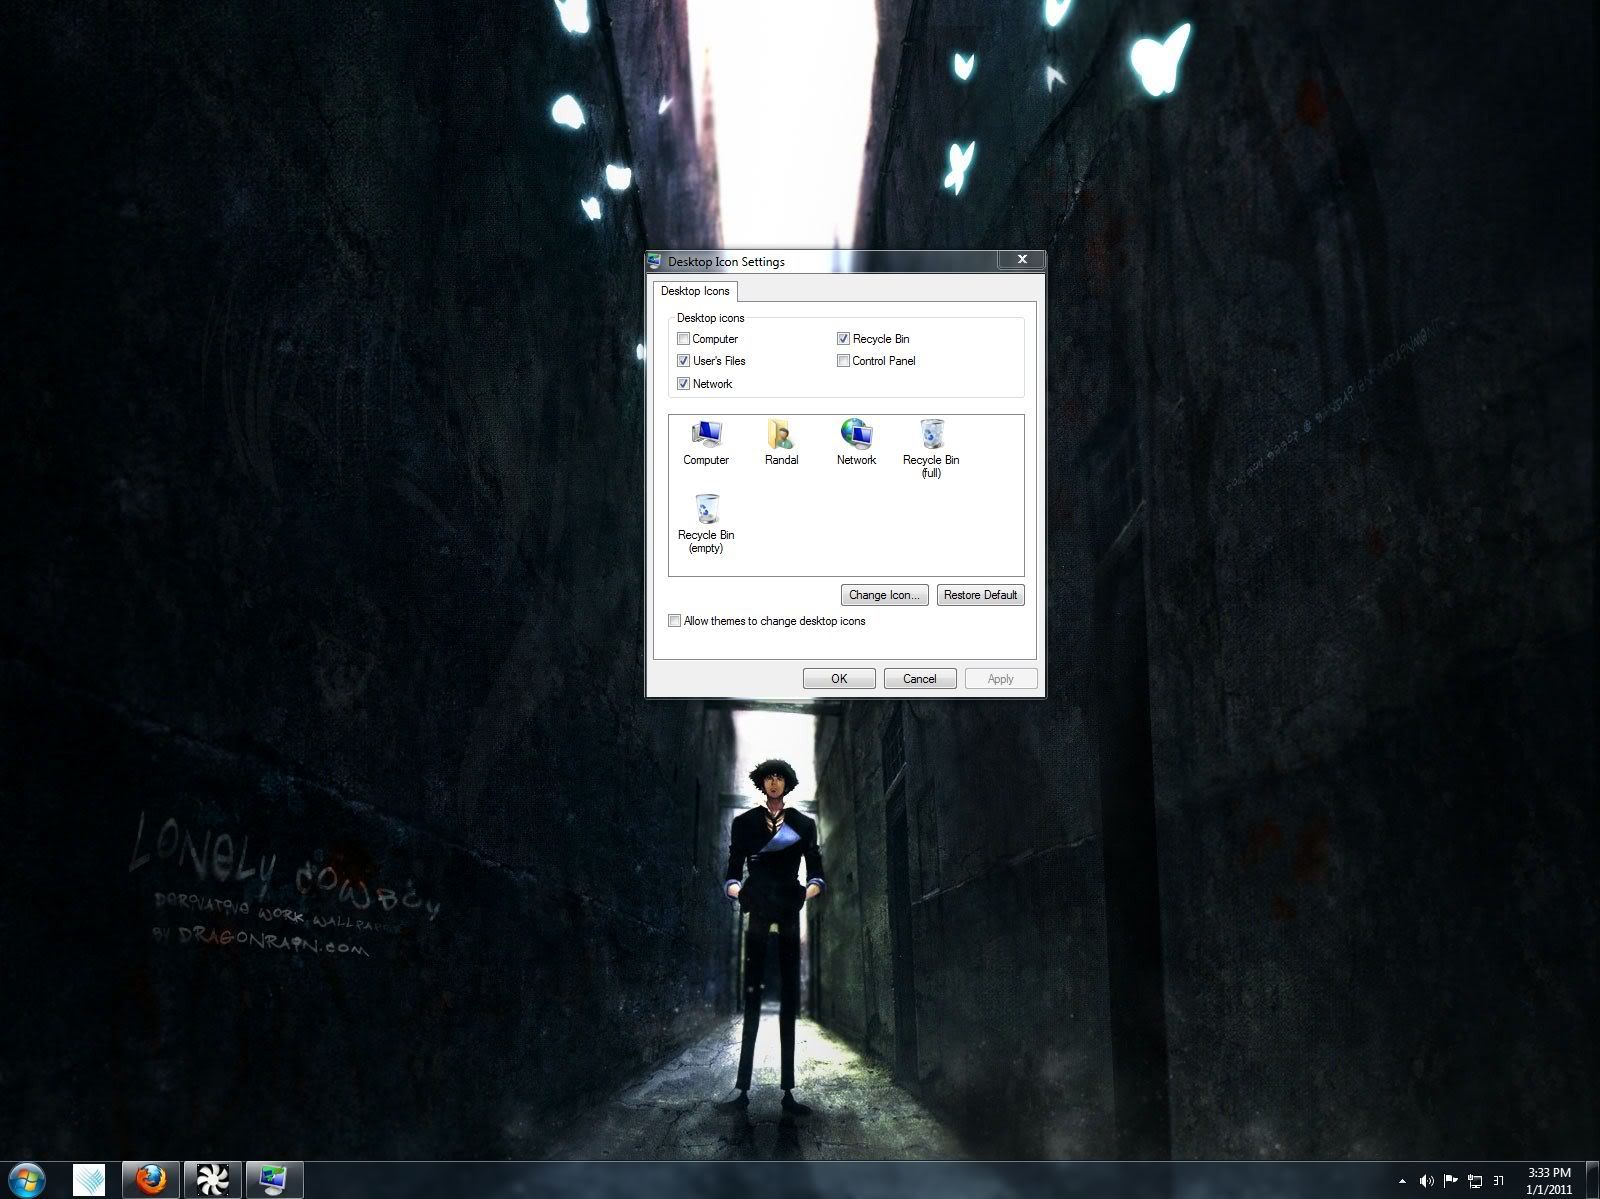 Disappeared Files Desktop, desktop icons are still there 0d3bde3c.jpg